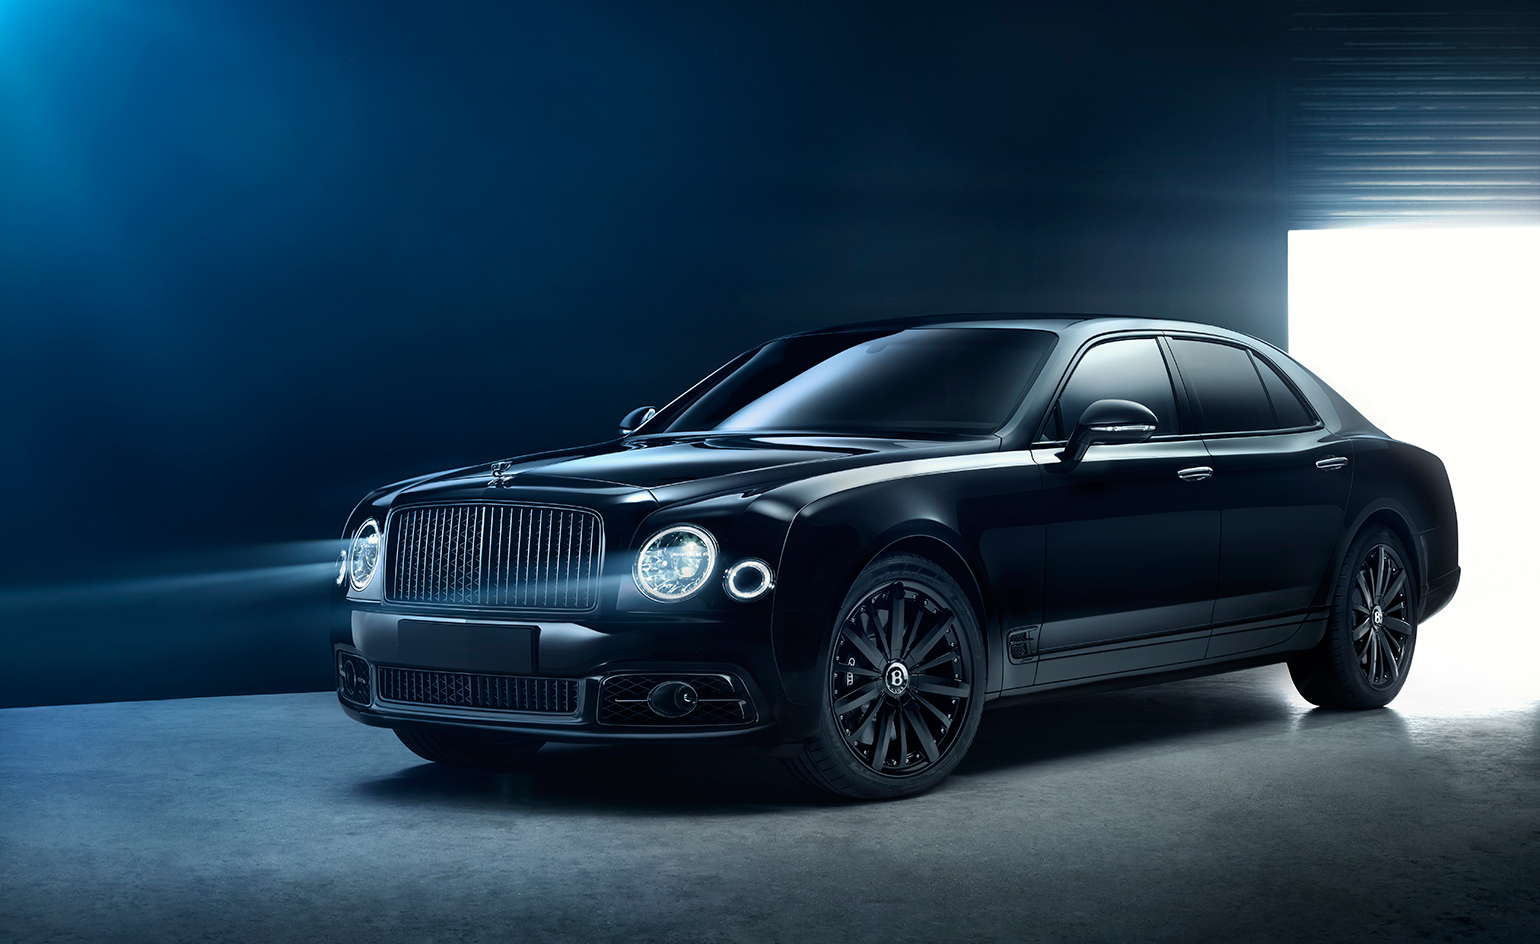 Bentley and Bamford Watch give birth to a stylish new car